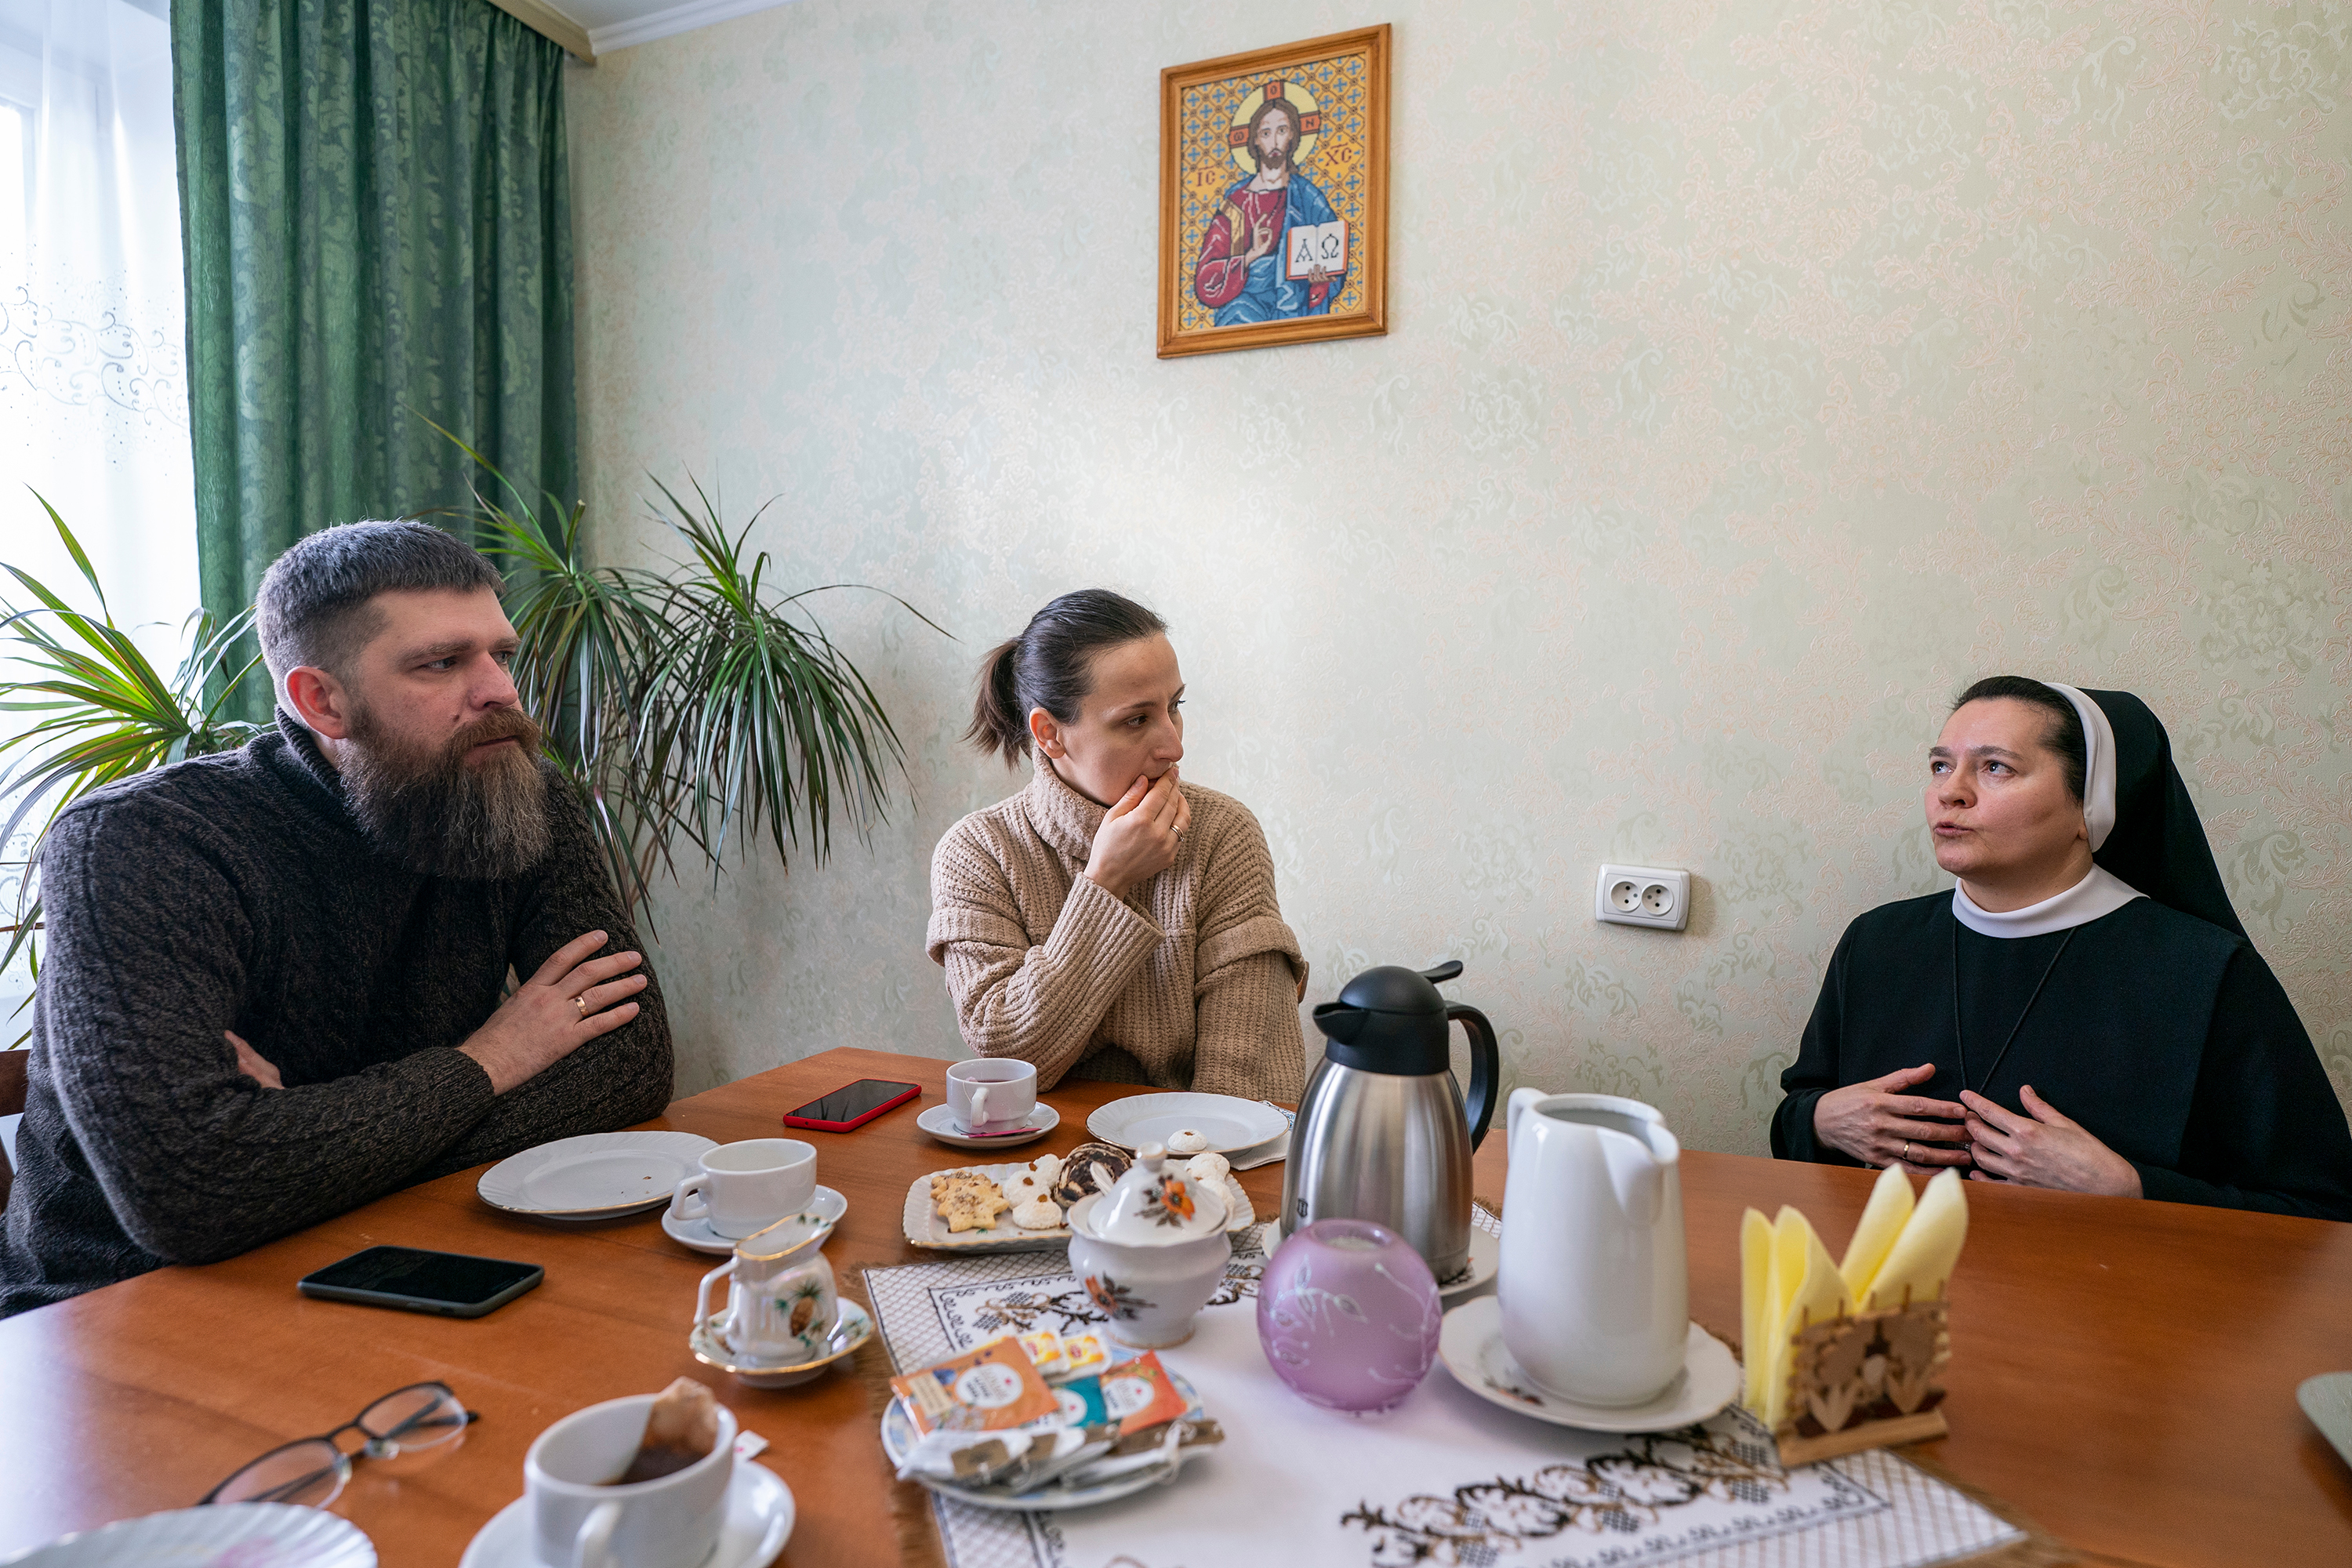 Translator Iryna Chernikova, center, and her husband, Stas Nepokrytyi, left, sit with Sr. Yanuariya Isyk, a member of the Sisters of the Order of St. Basil the Great whose ministry is based in the capital of Kyiv, here in the small monastery apartment shared with two other sisters. (GSR photo/Gregg Brekke)